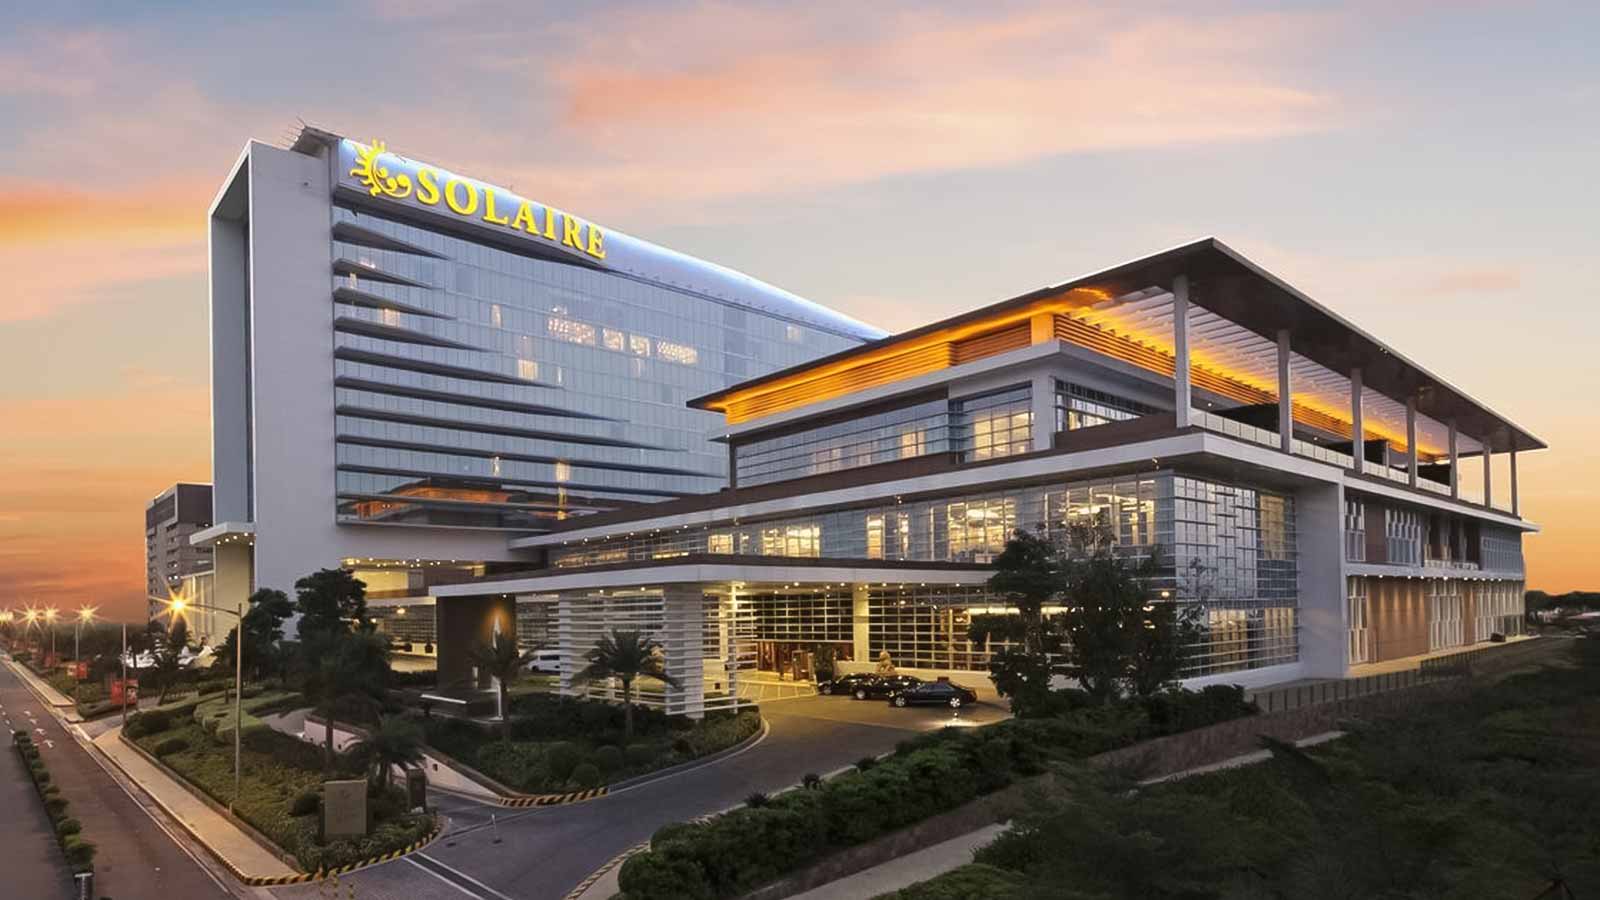 Solaire Resort and Casino